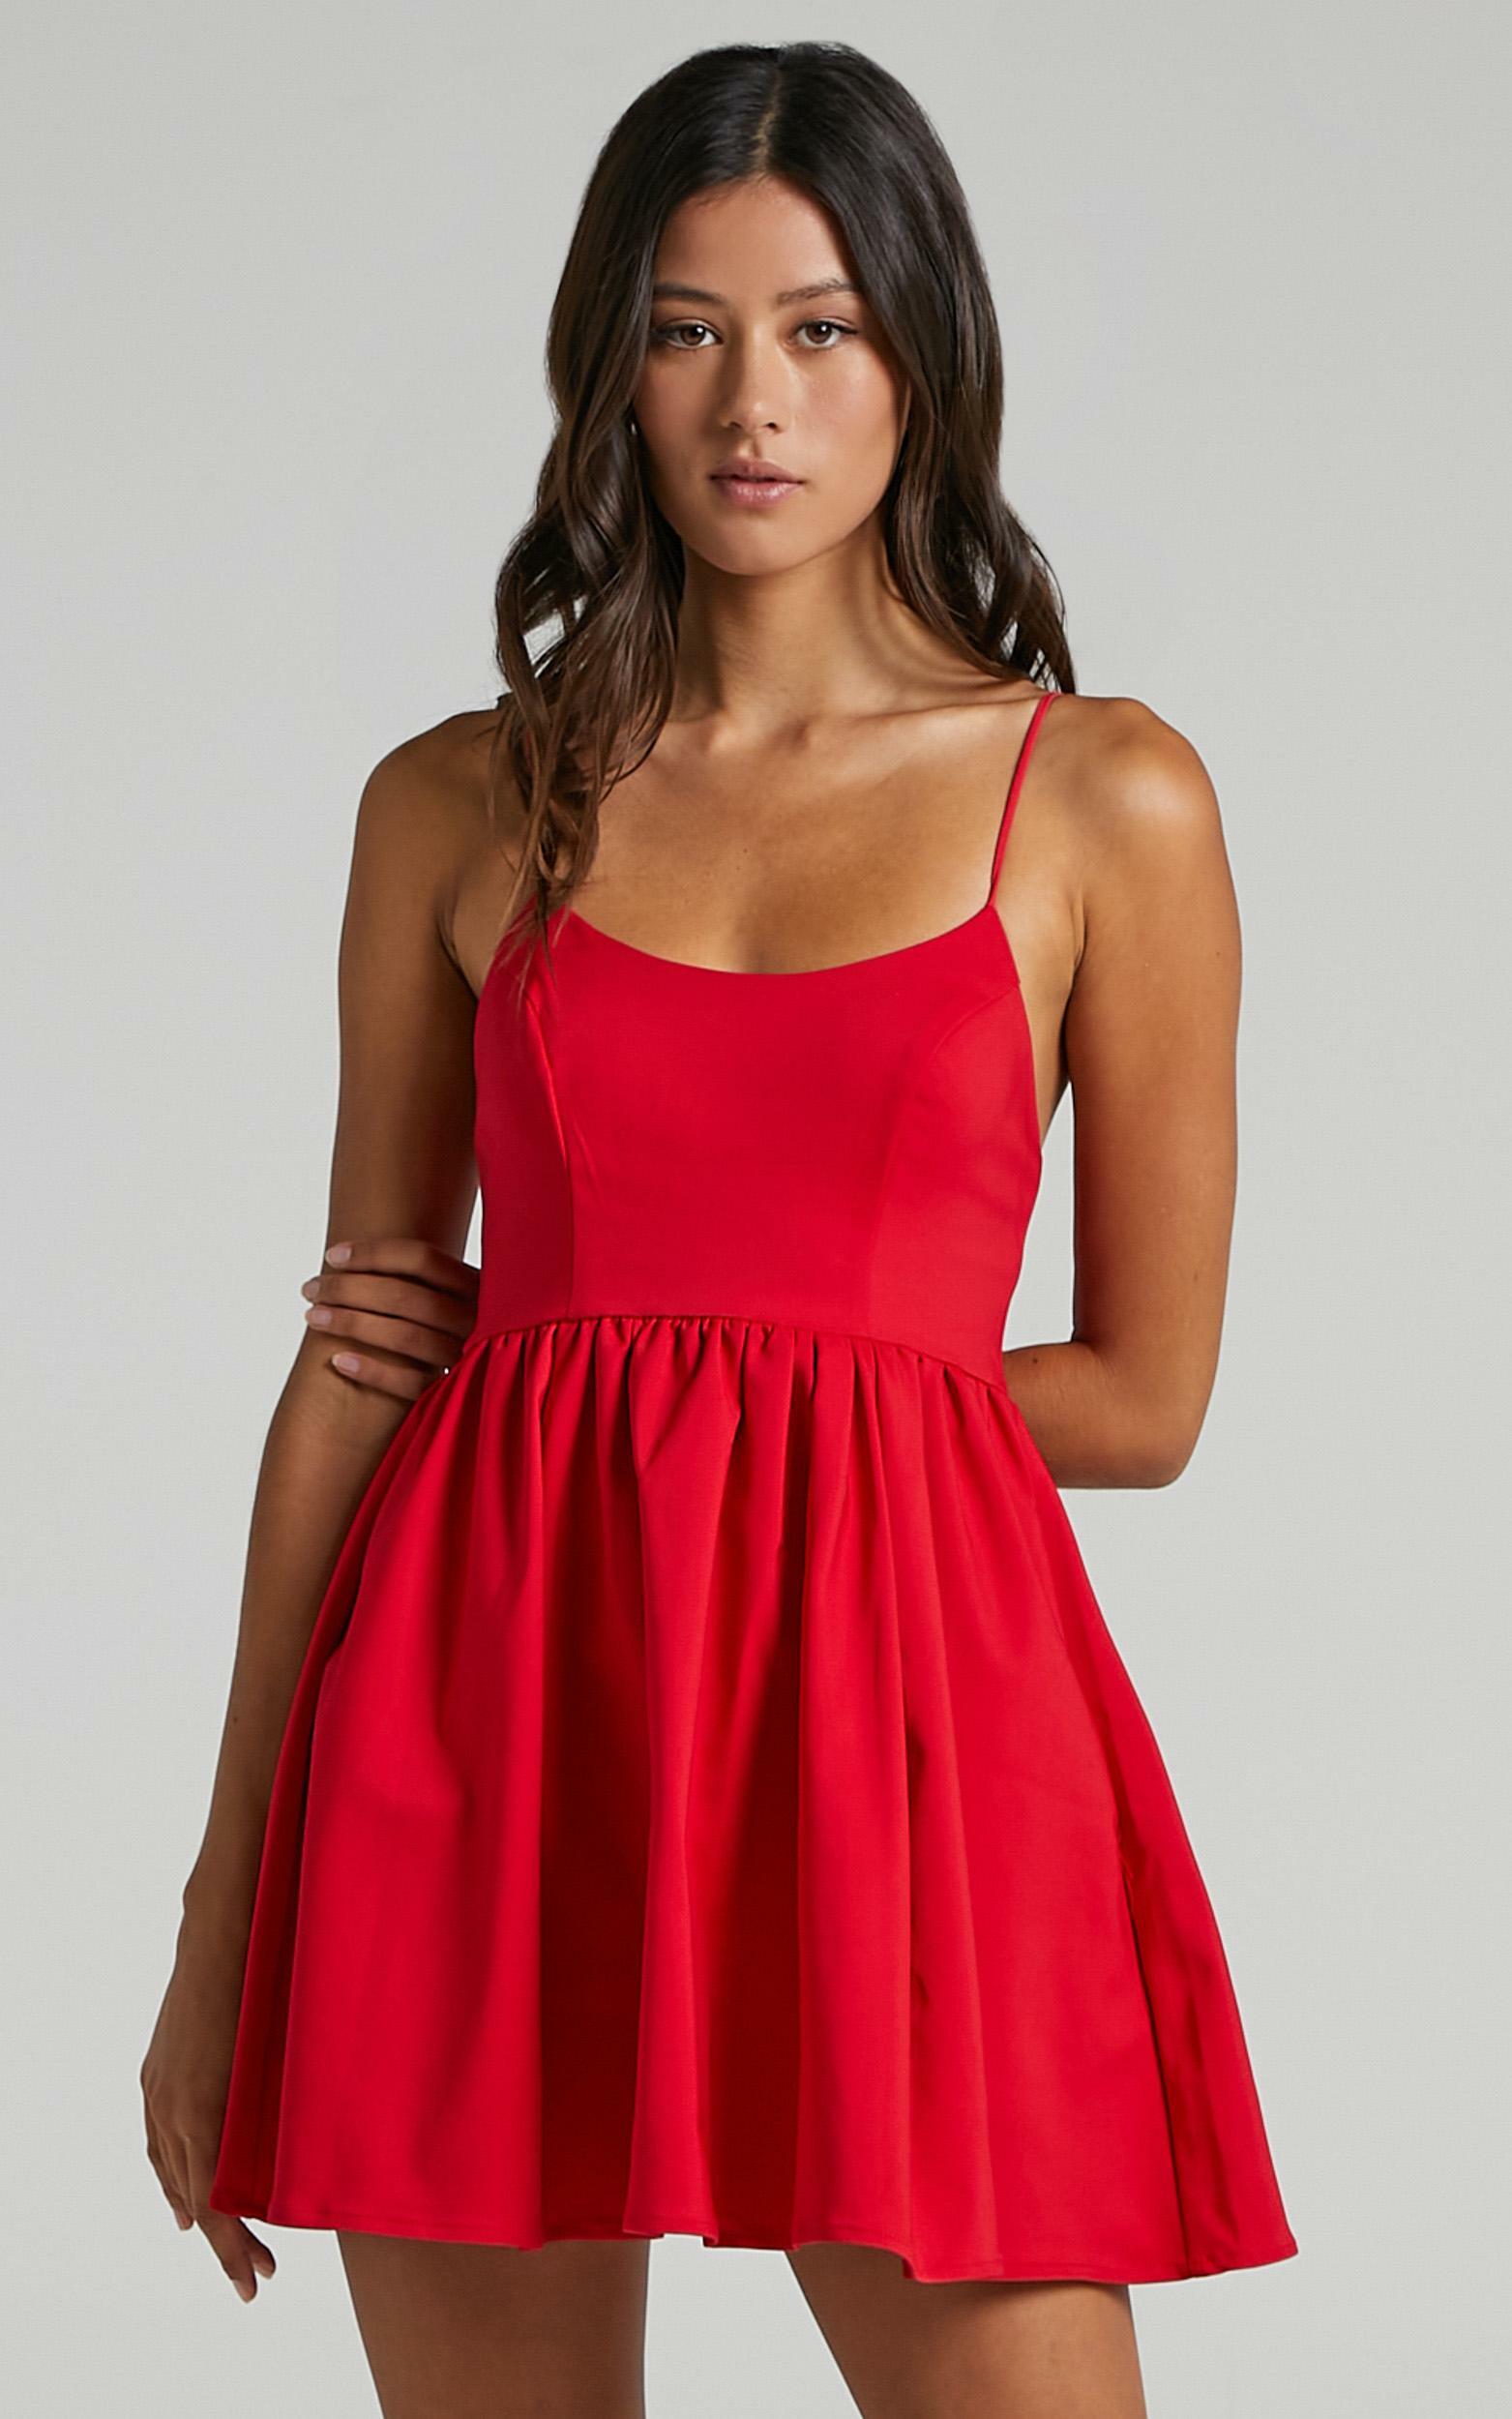 You Got Nothing To Prove A-line Mini Dress in Red - 20, RED3, hi-res image number null